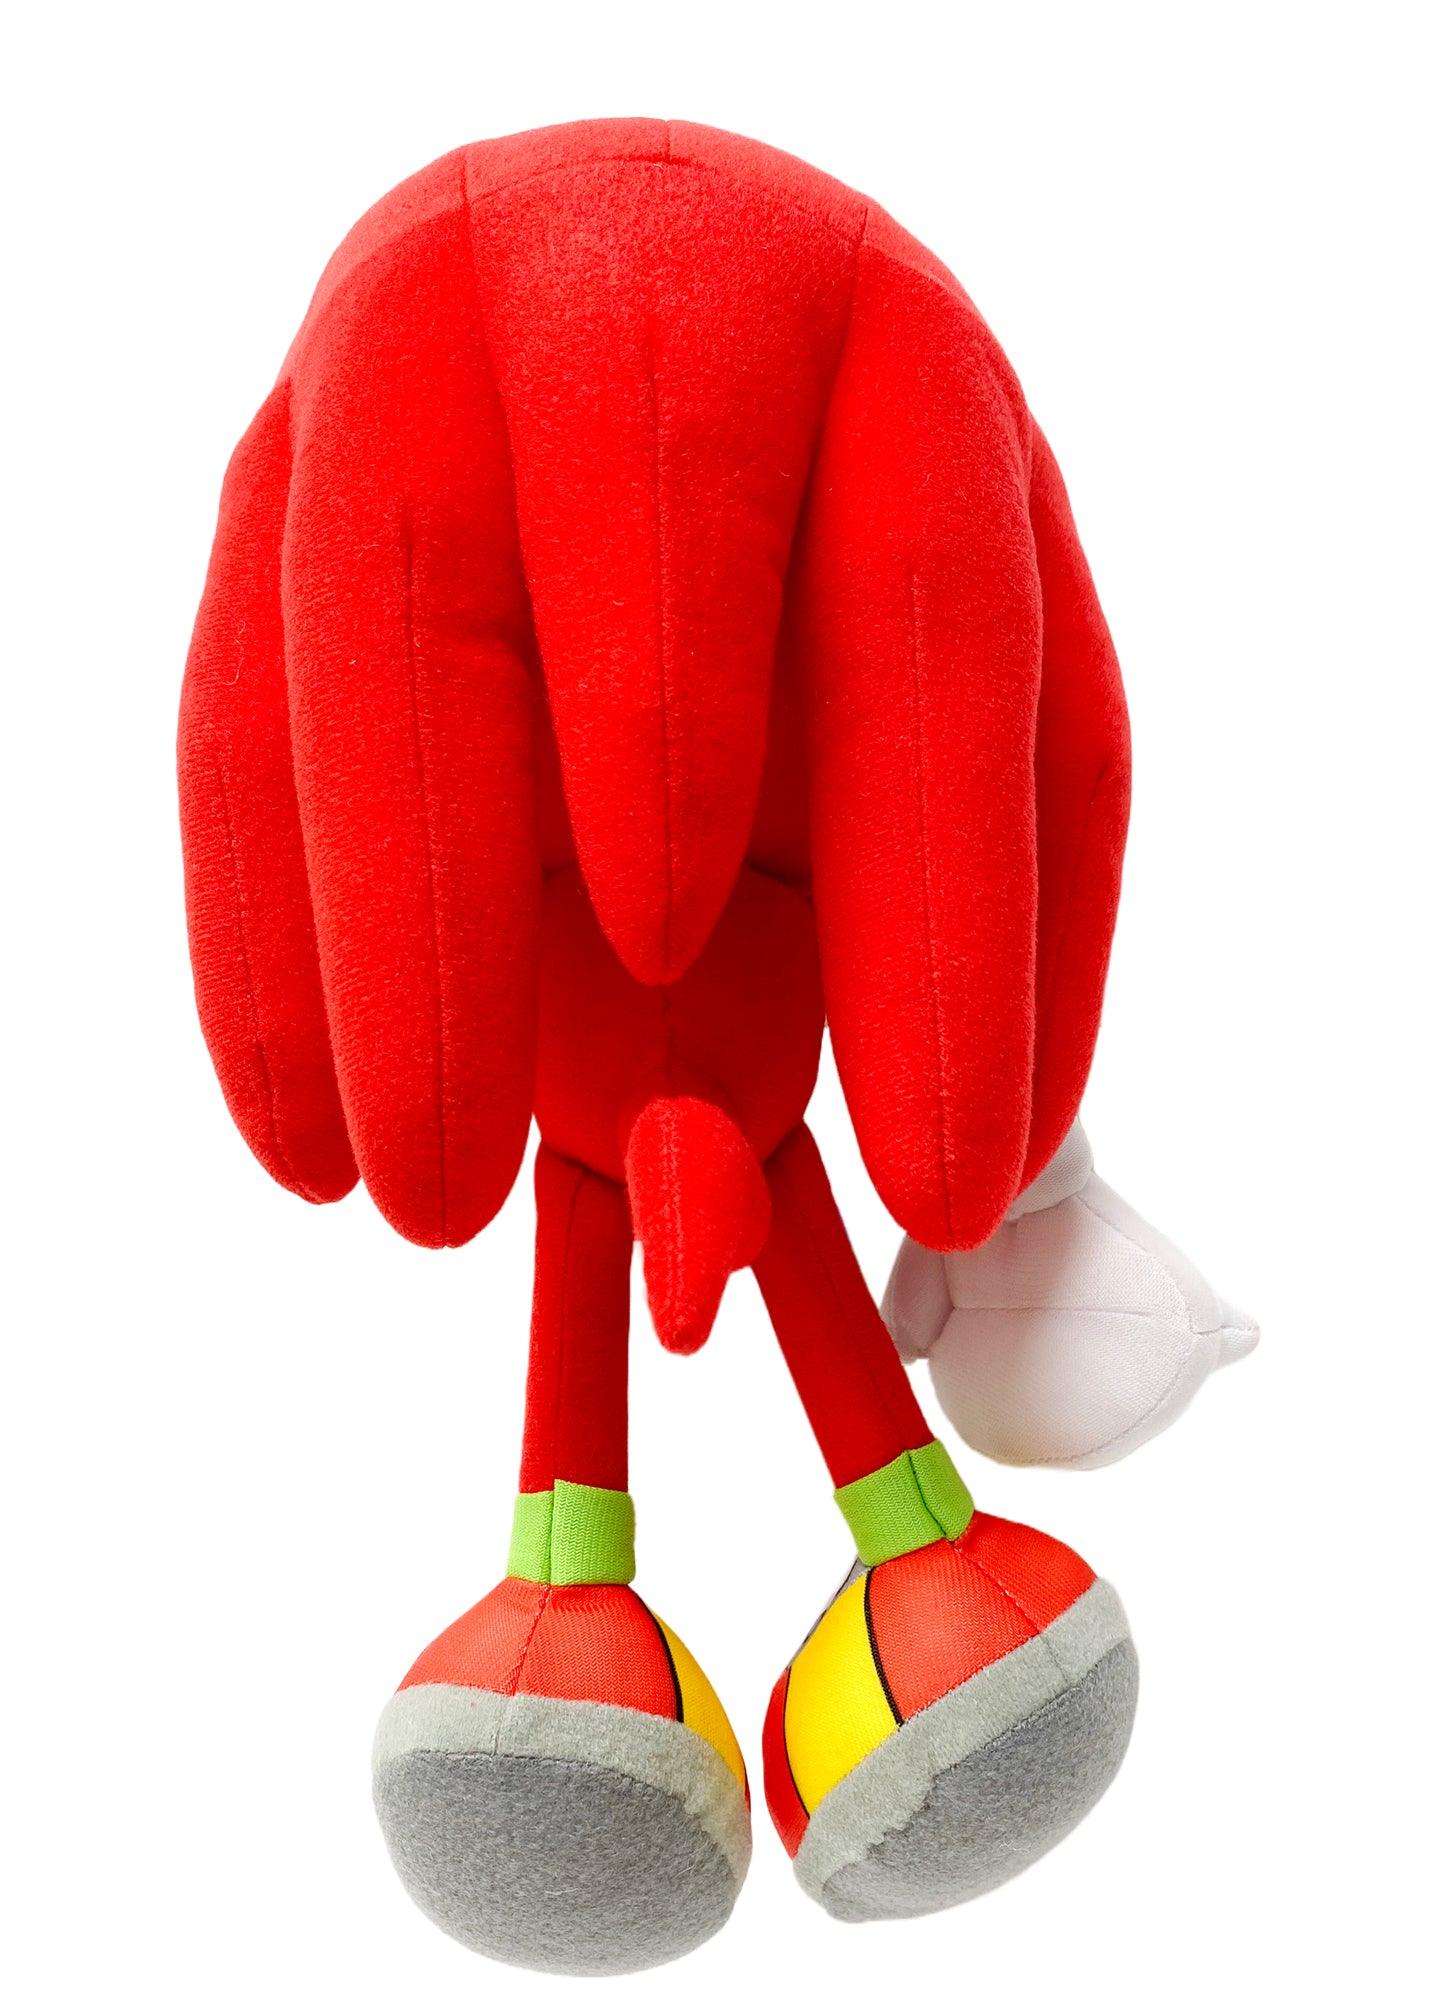 New Mighty The Armadillo SONIC THE HEDGEHOG 10 inch Plush (Great Eastern)